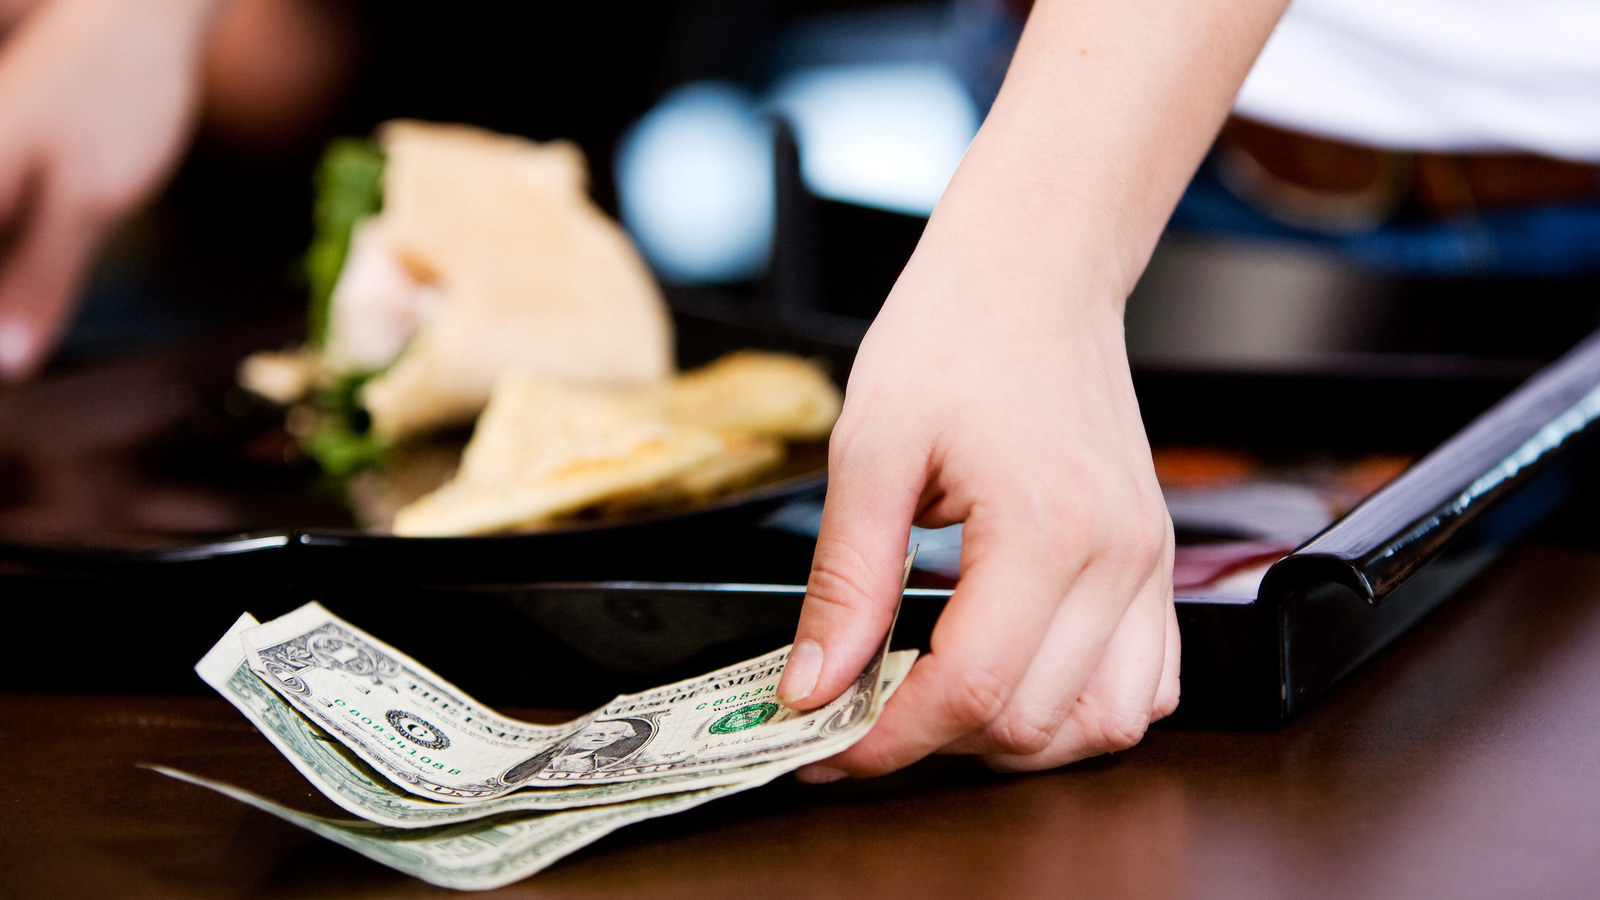 Waiters Reveal What Restaurants Get The Best Tips - Mashed